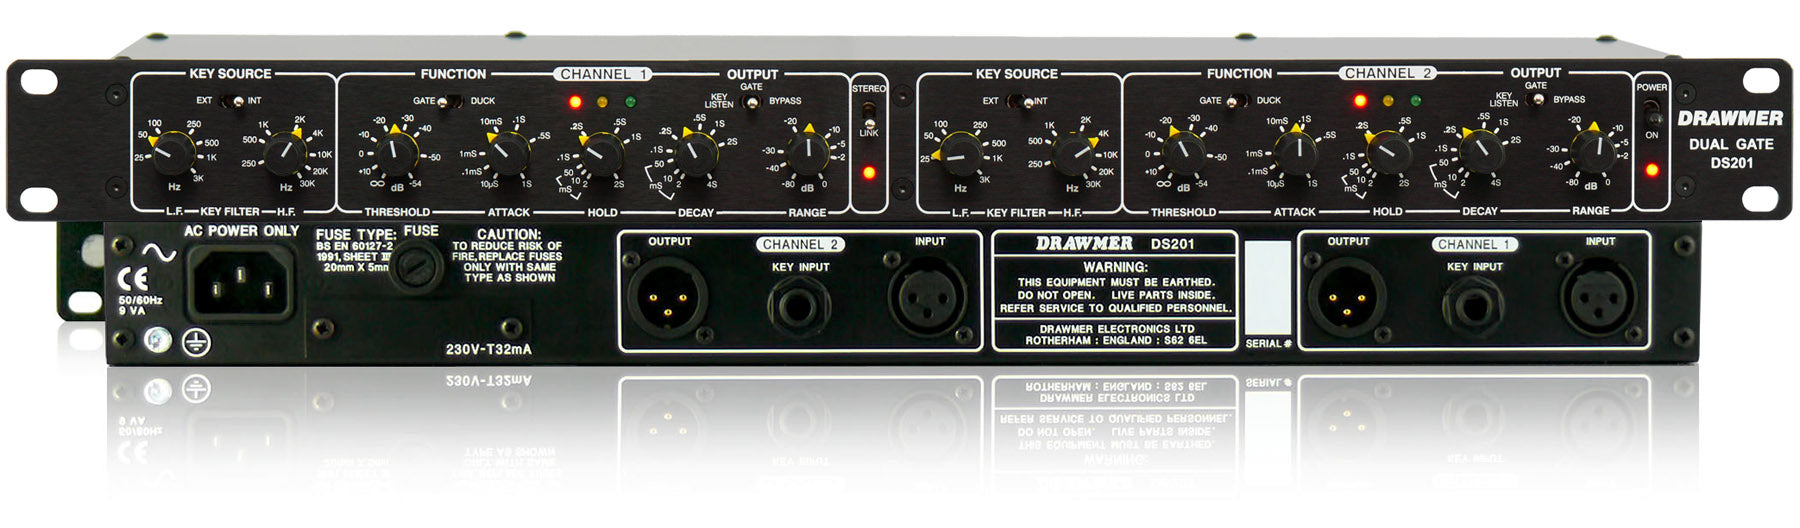 Drawmer DS201  Stereo Gate (USED)